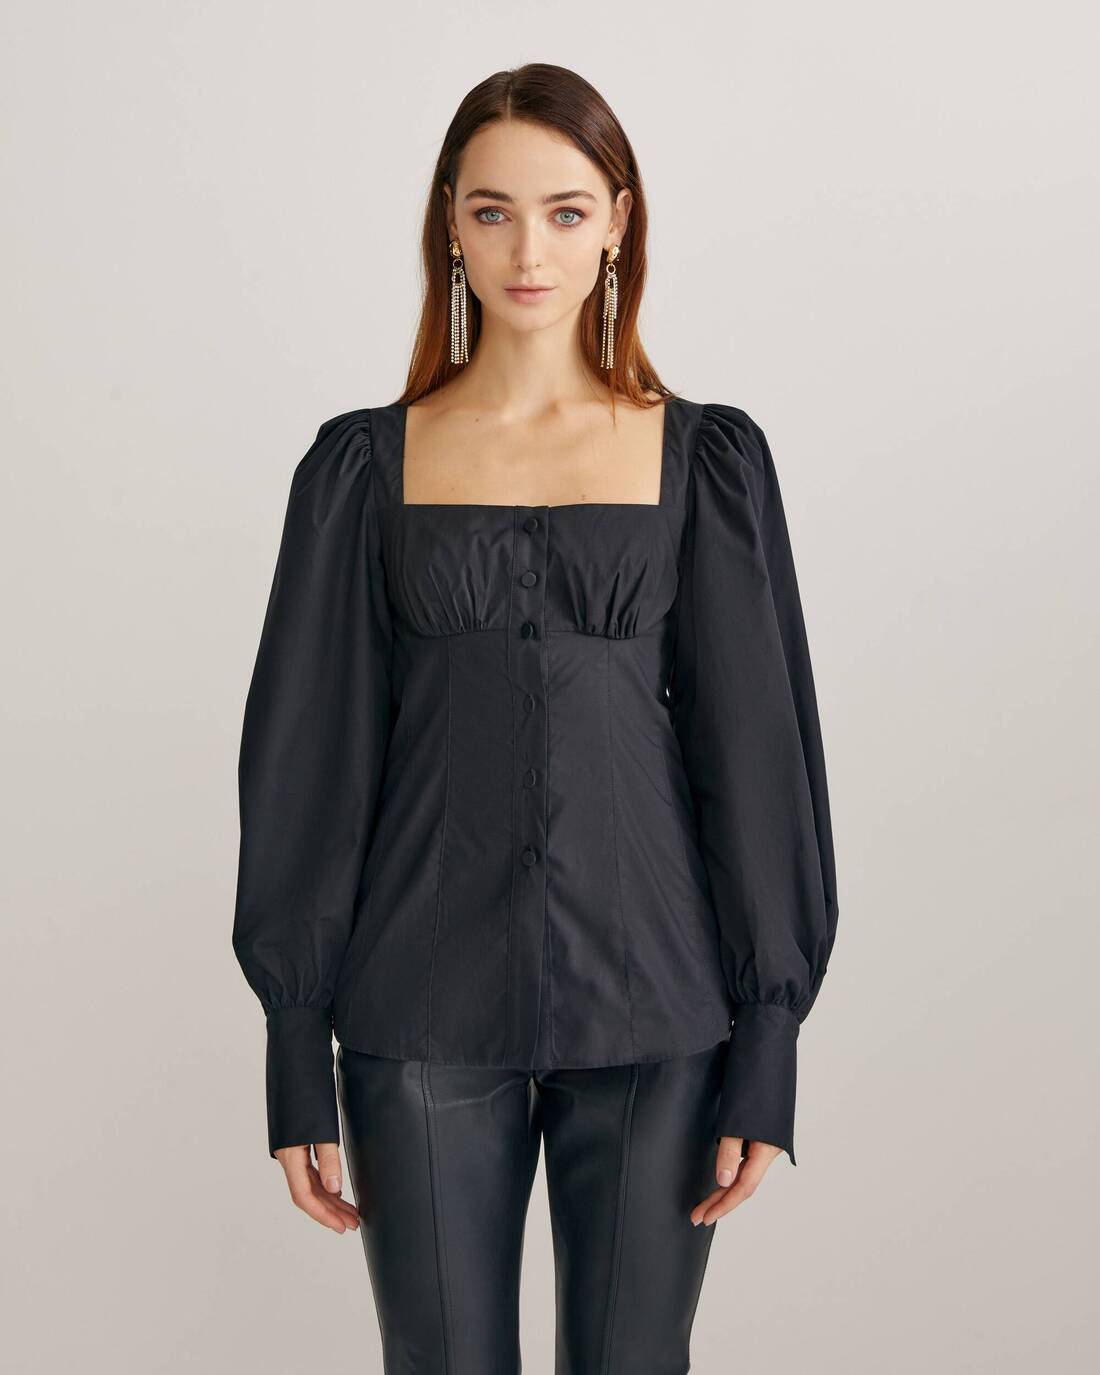 Cotton blouse with corset lines